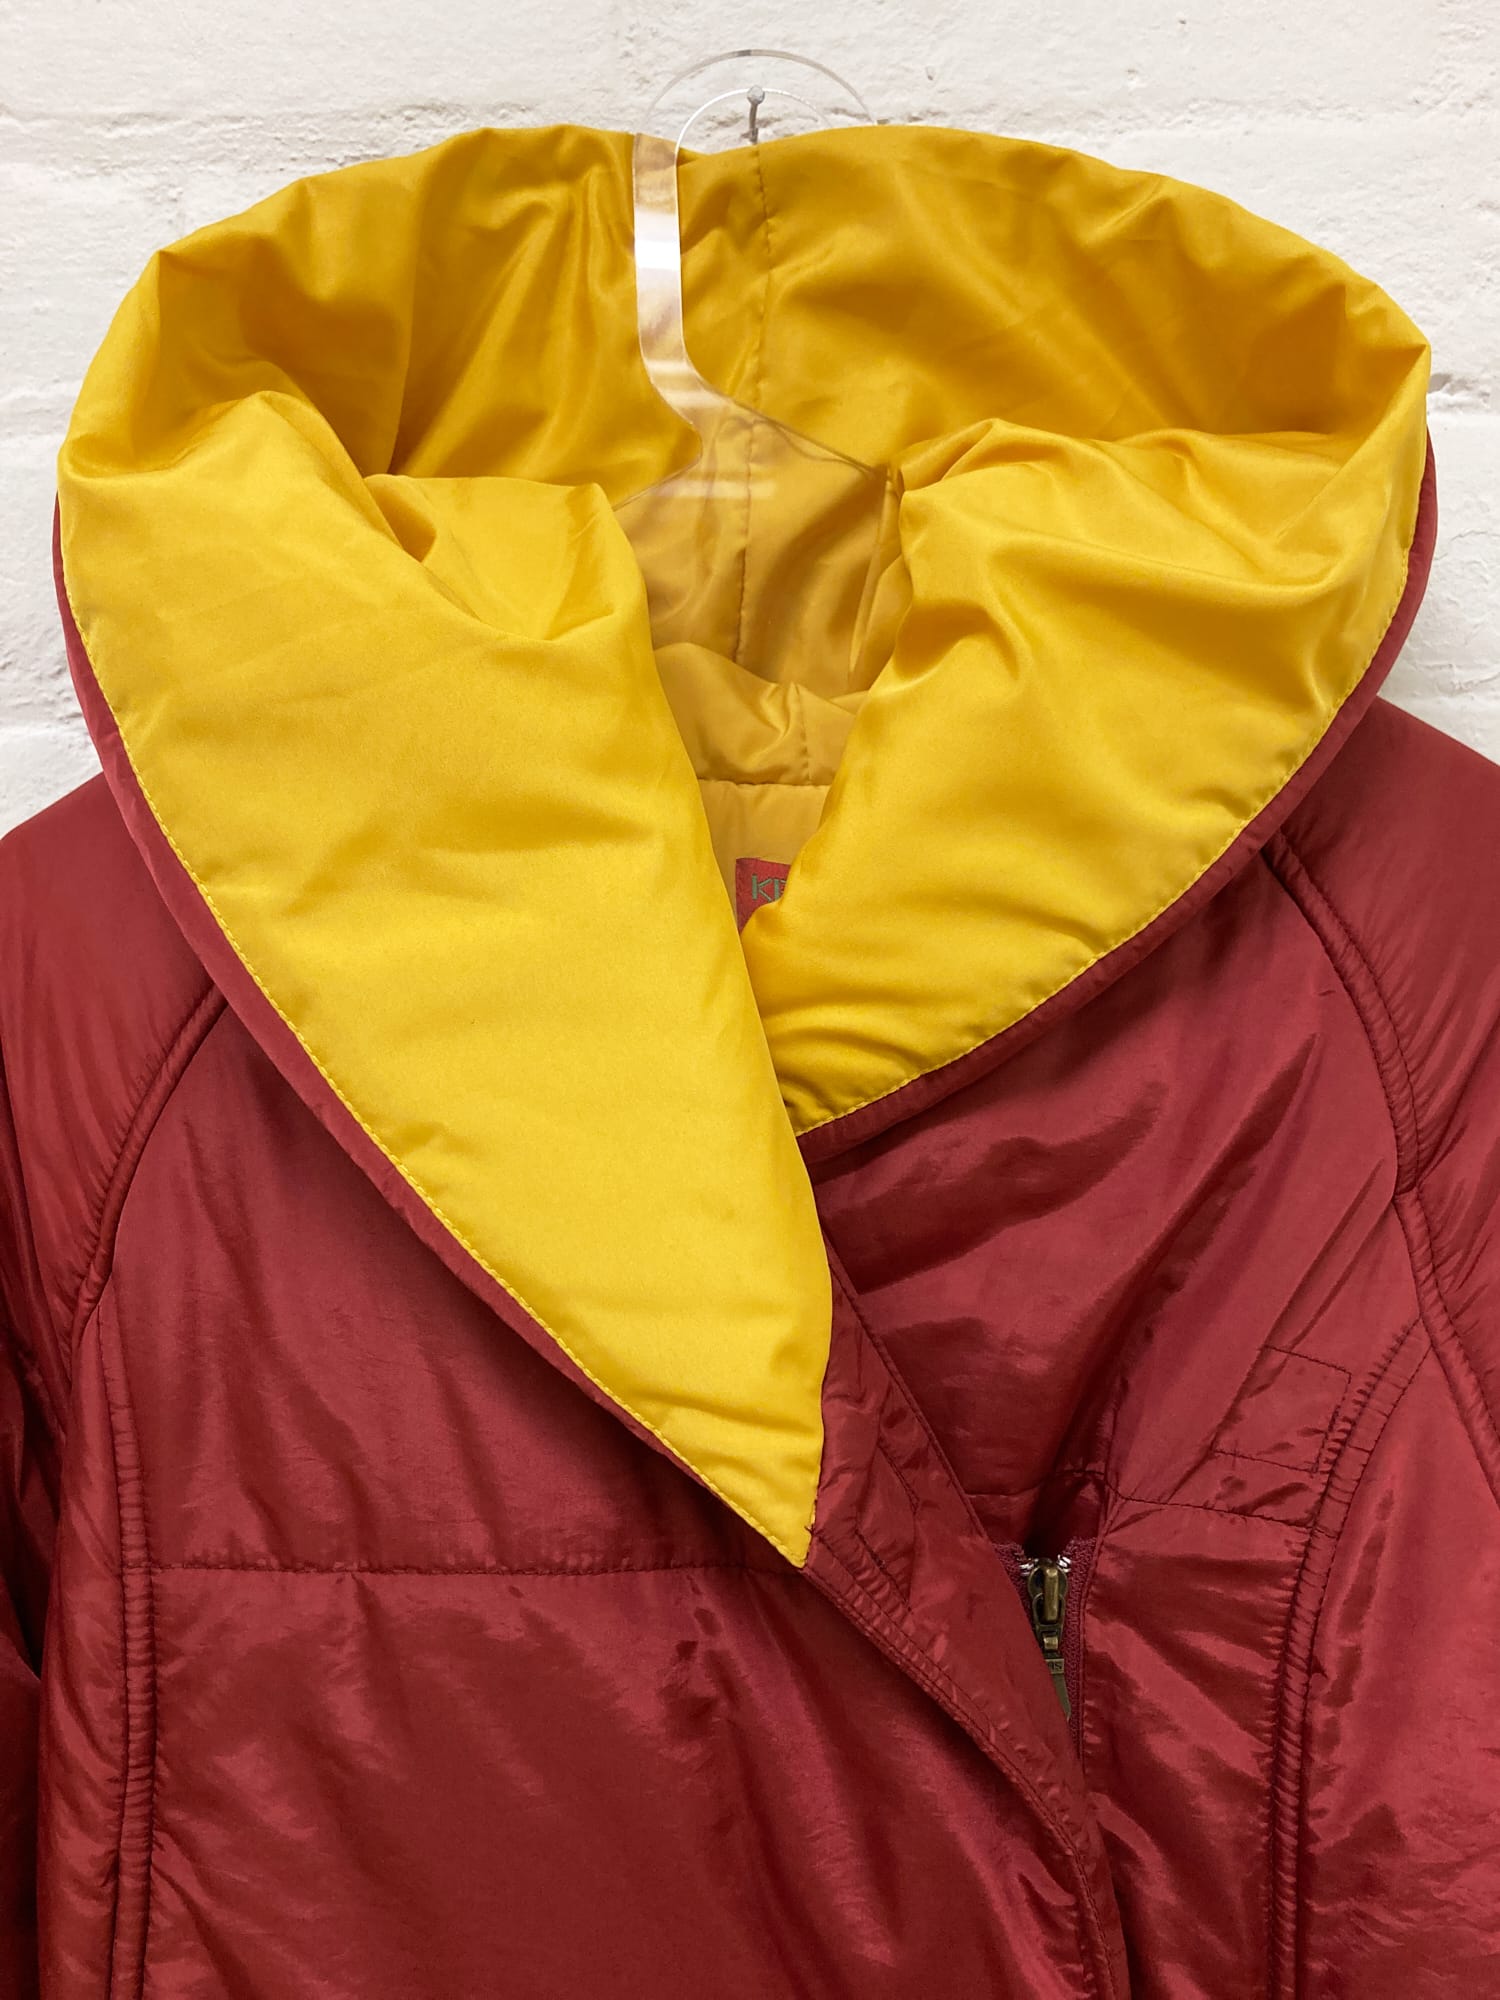 Kenzo Jungle red hooded puffer jacket with yellow lining - kids size 12